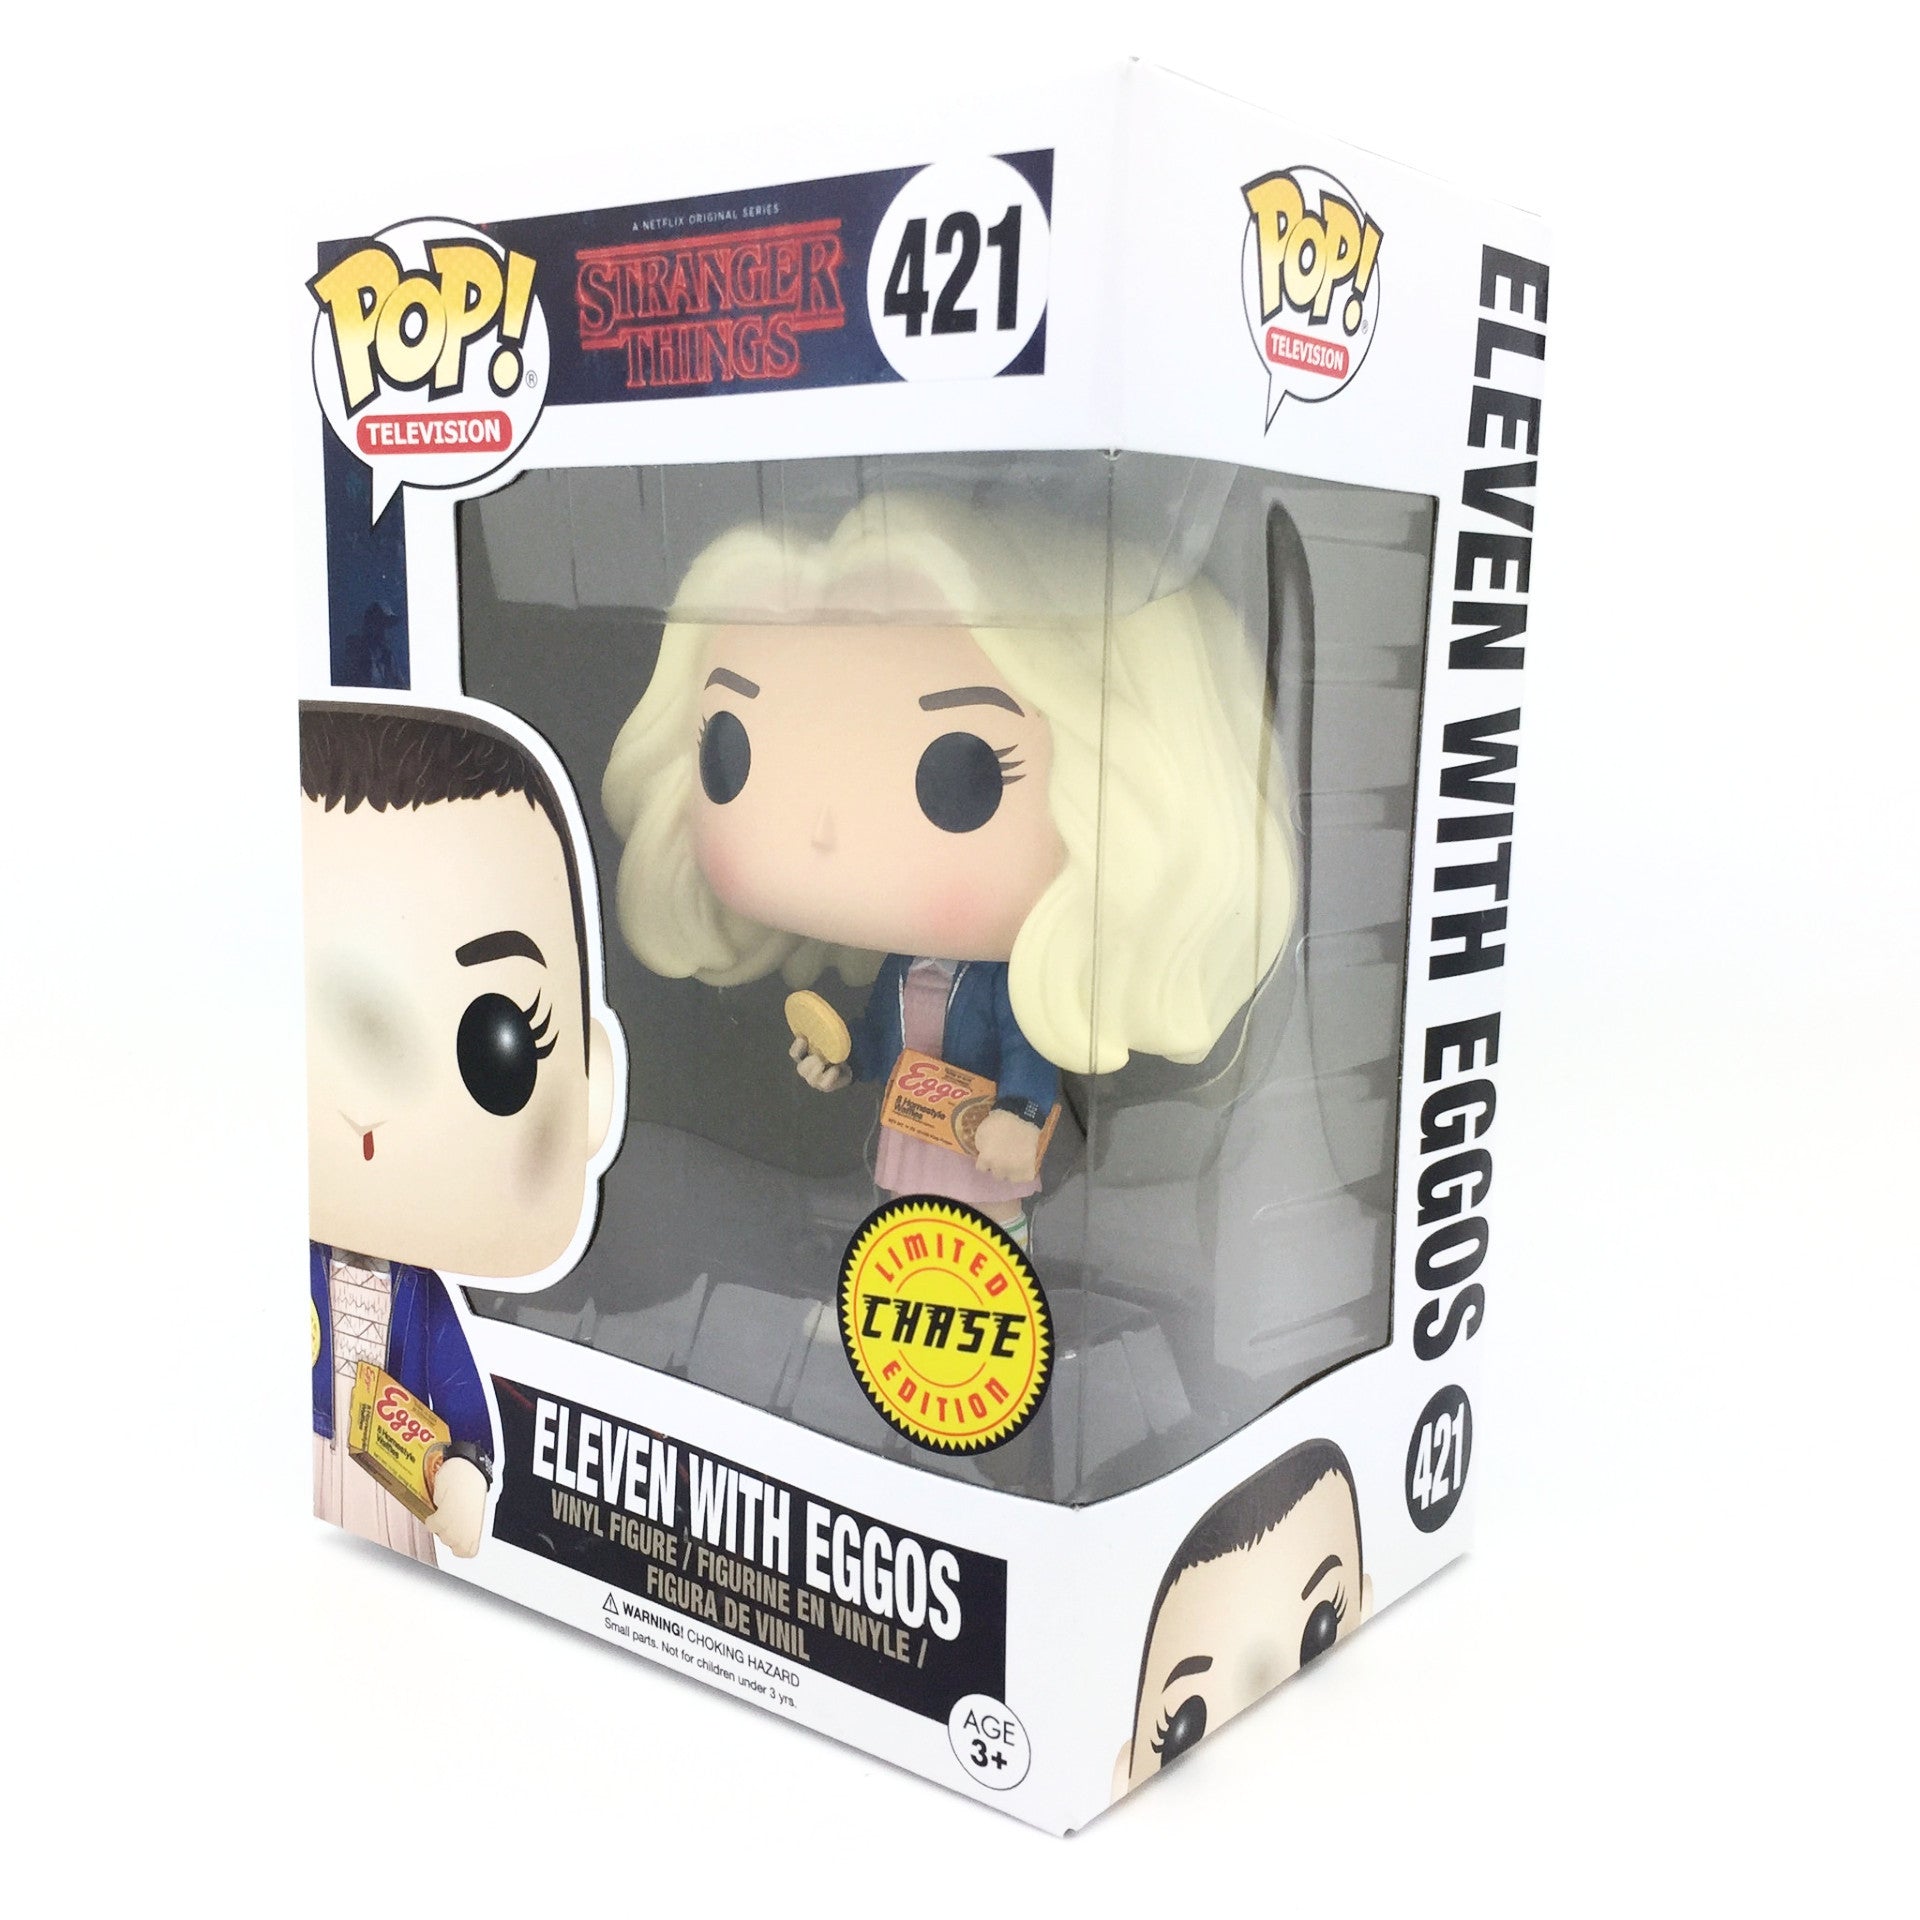 Stranger Things Eleven with Eggos Blonde Wig Limited Chase Edition POP Vinyl Figure by Funko